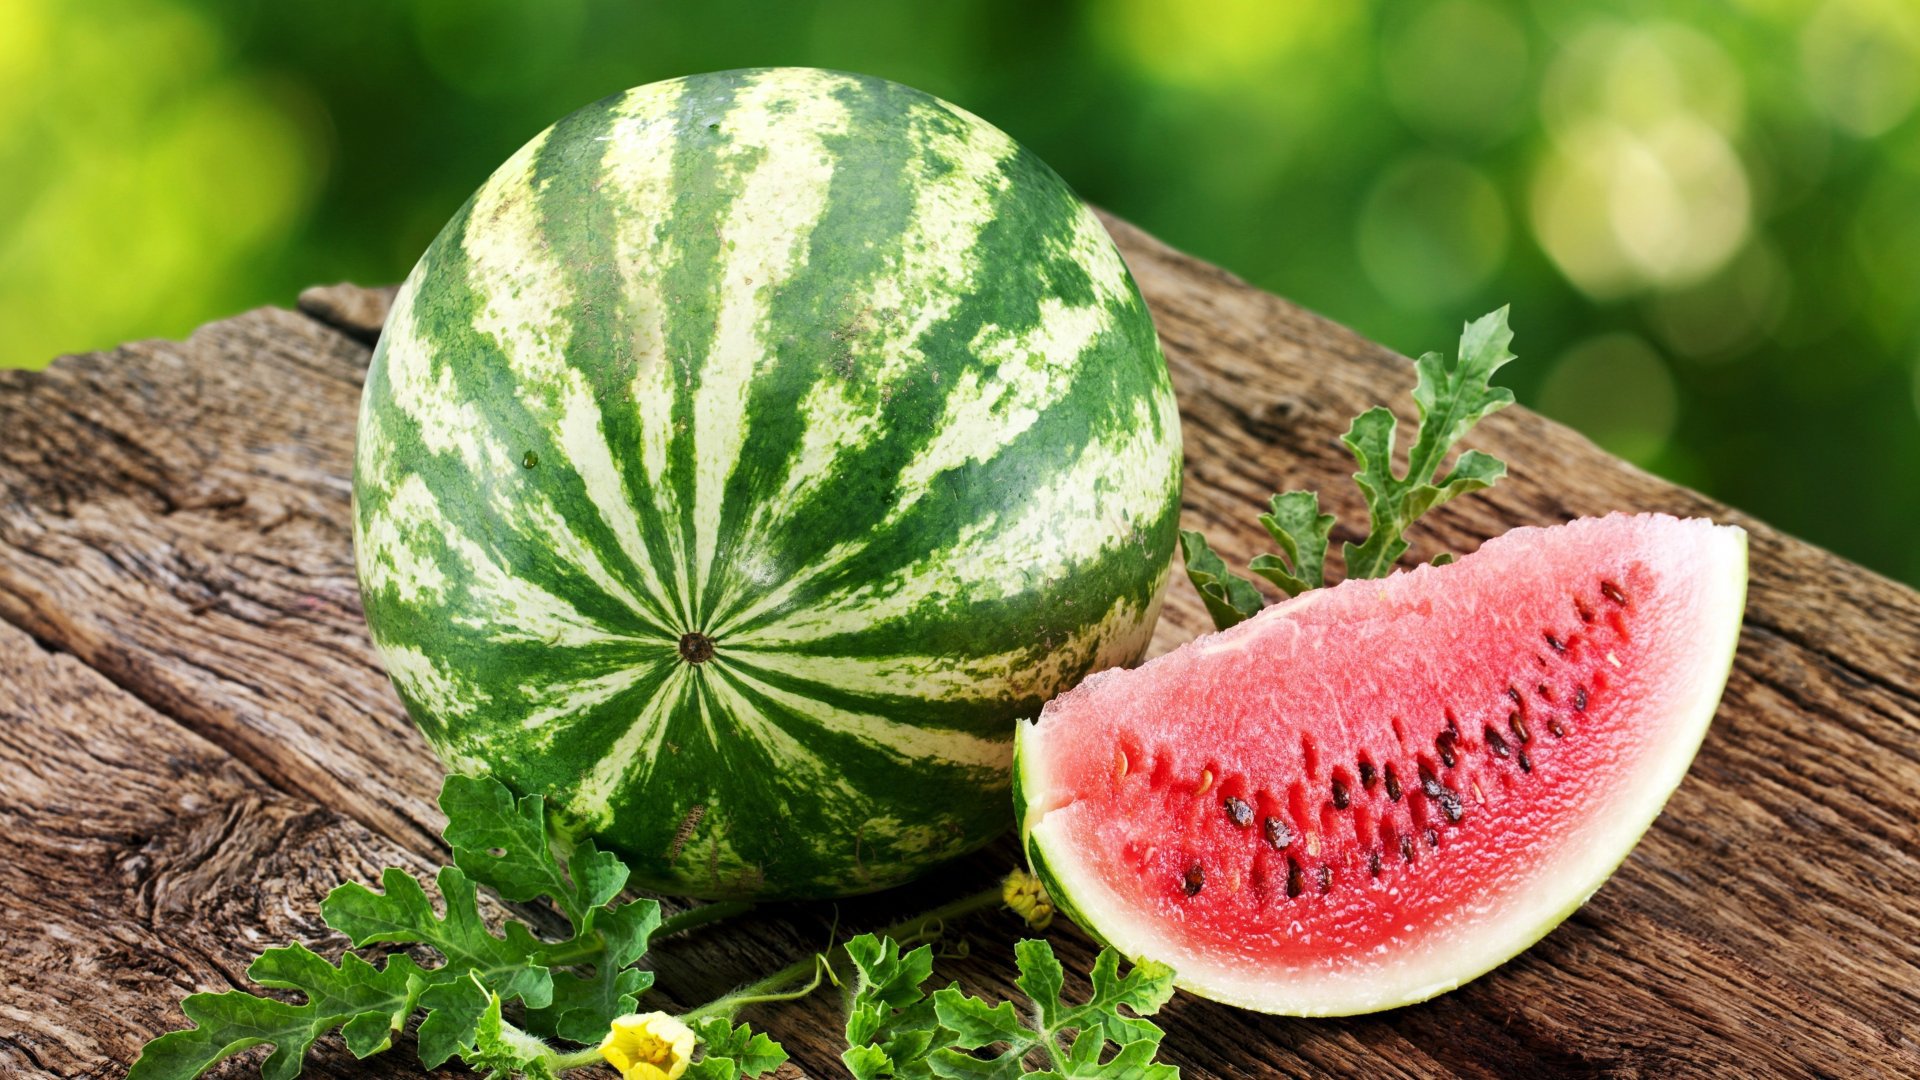 Watermelon Wallpaper Image Photos Pictures Background